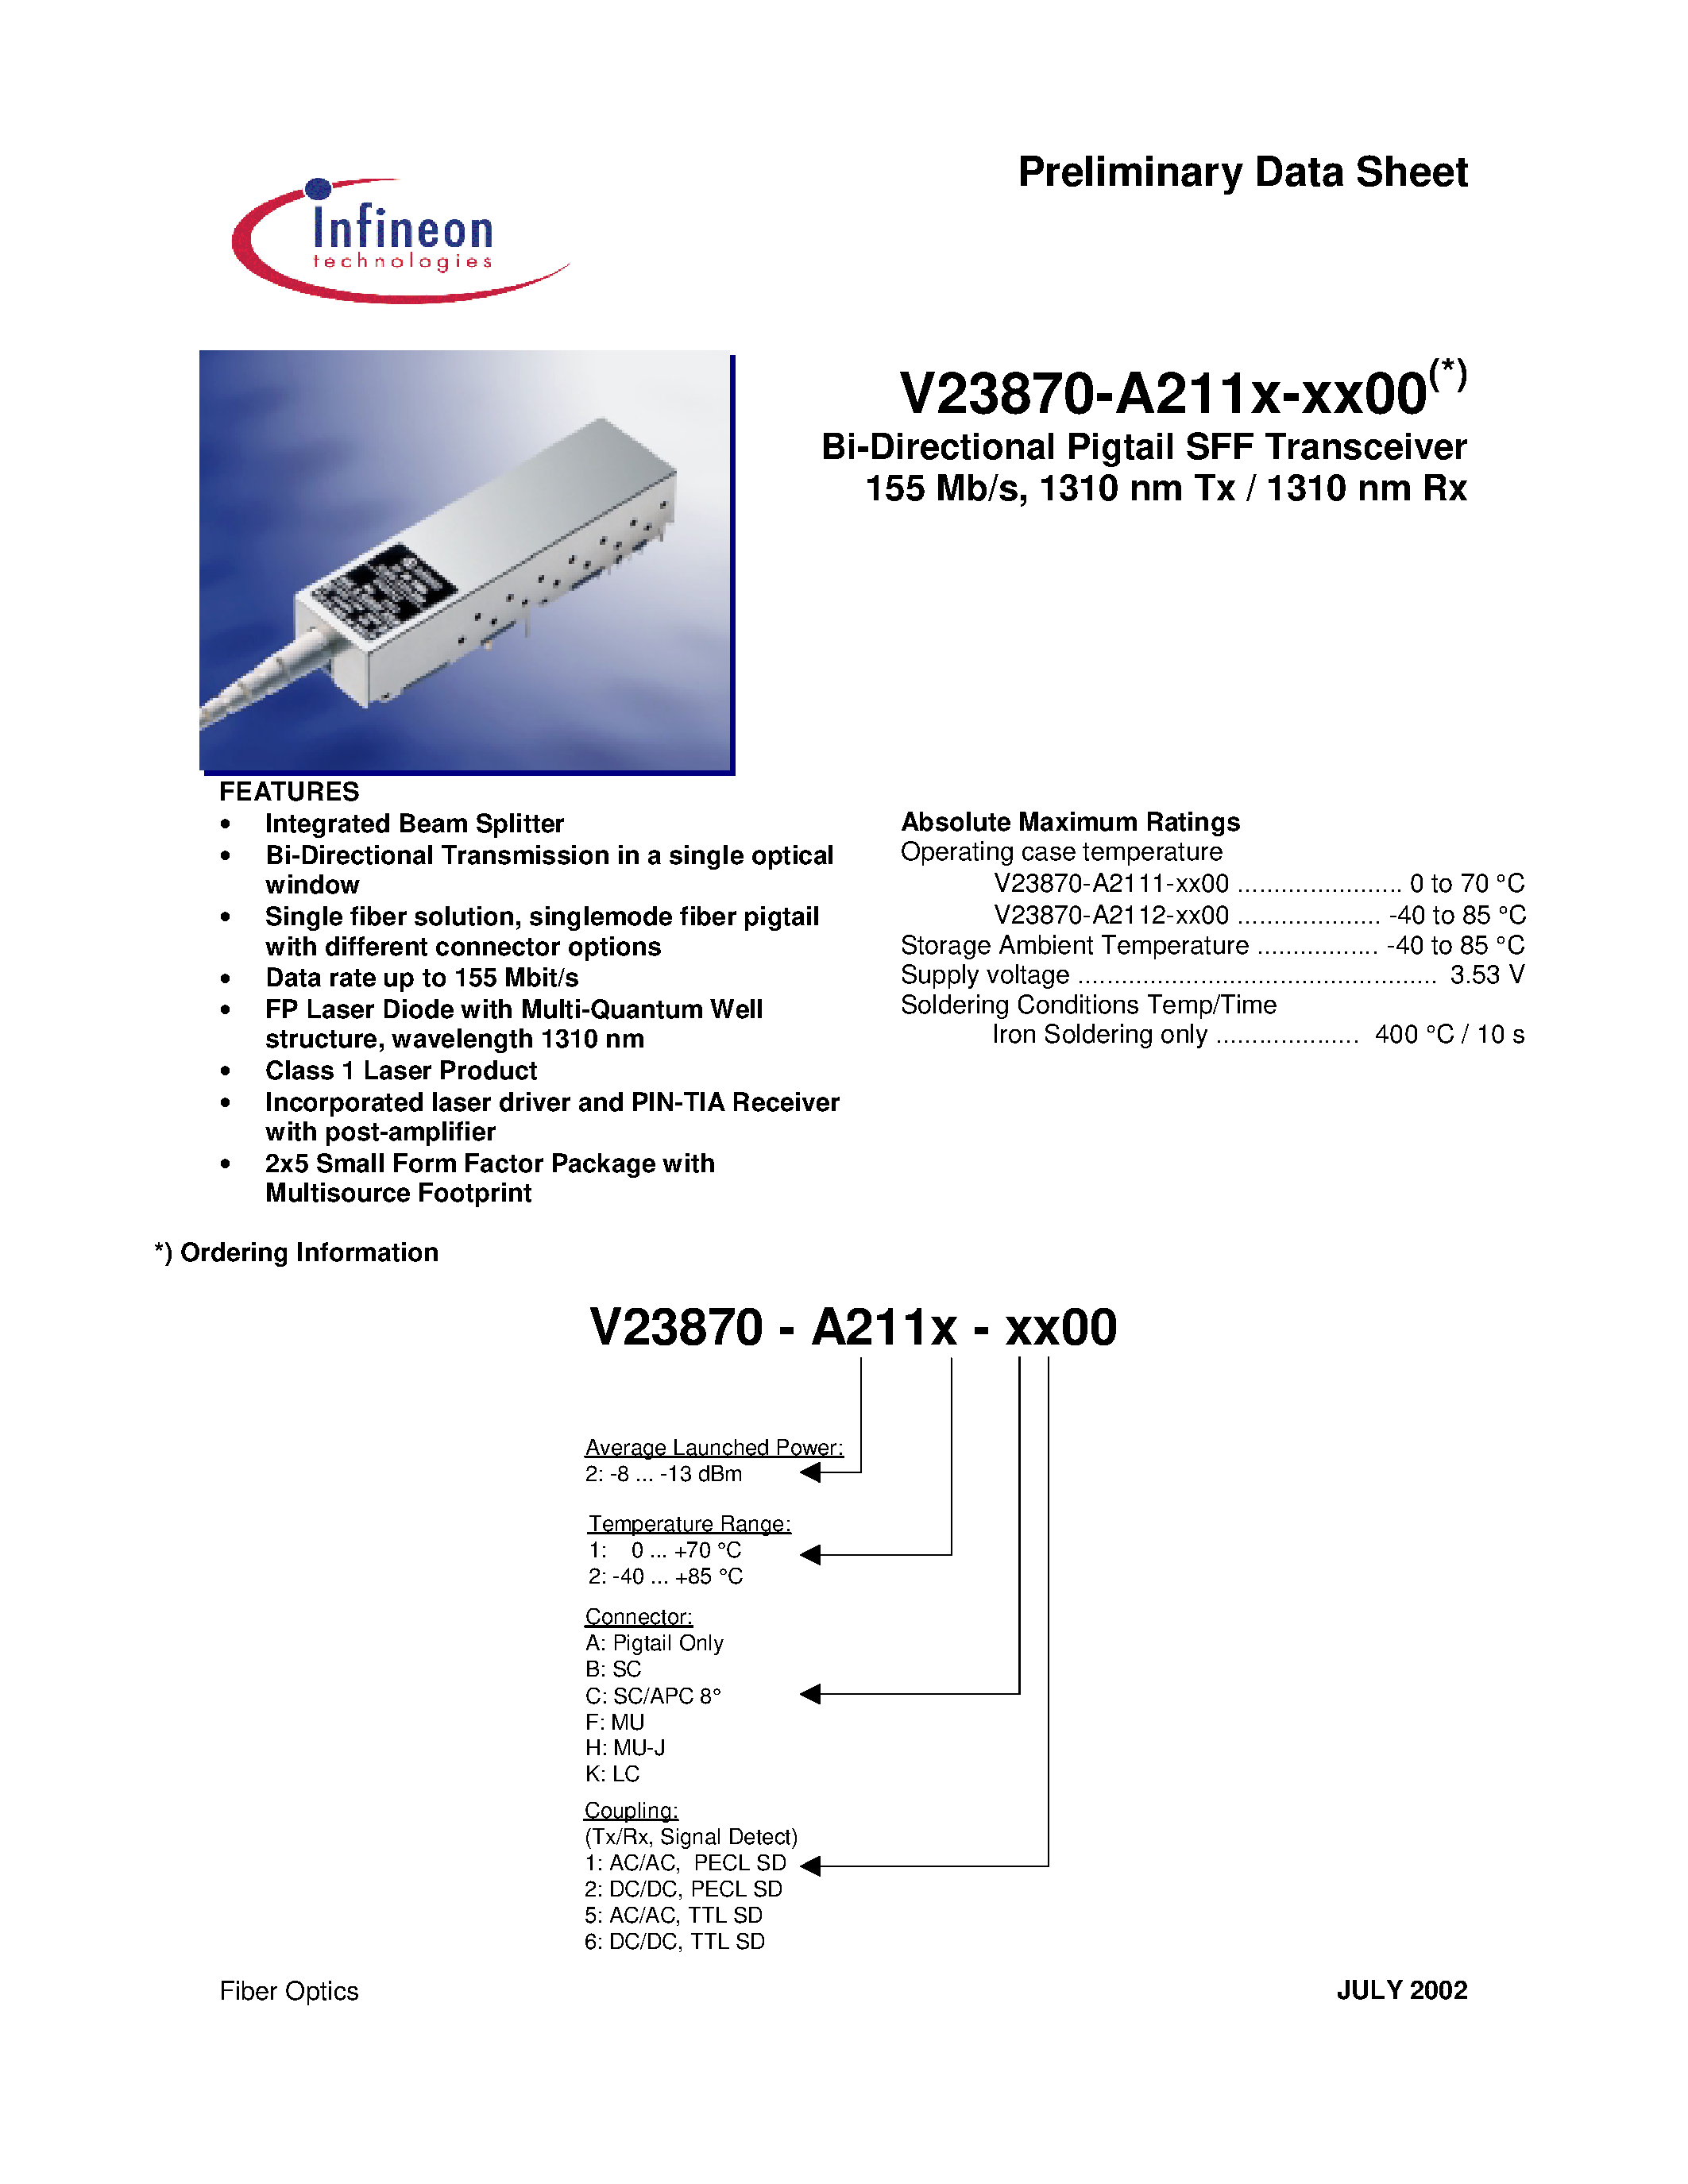 Datasheet V23870-A2112-C200 - Bi-Directional Pigtail SFF Transceiver 155 Mb/s/ 1310 nm Tx / 1310 nm Rx page 1